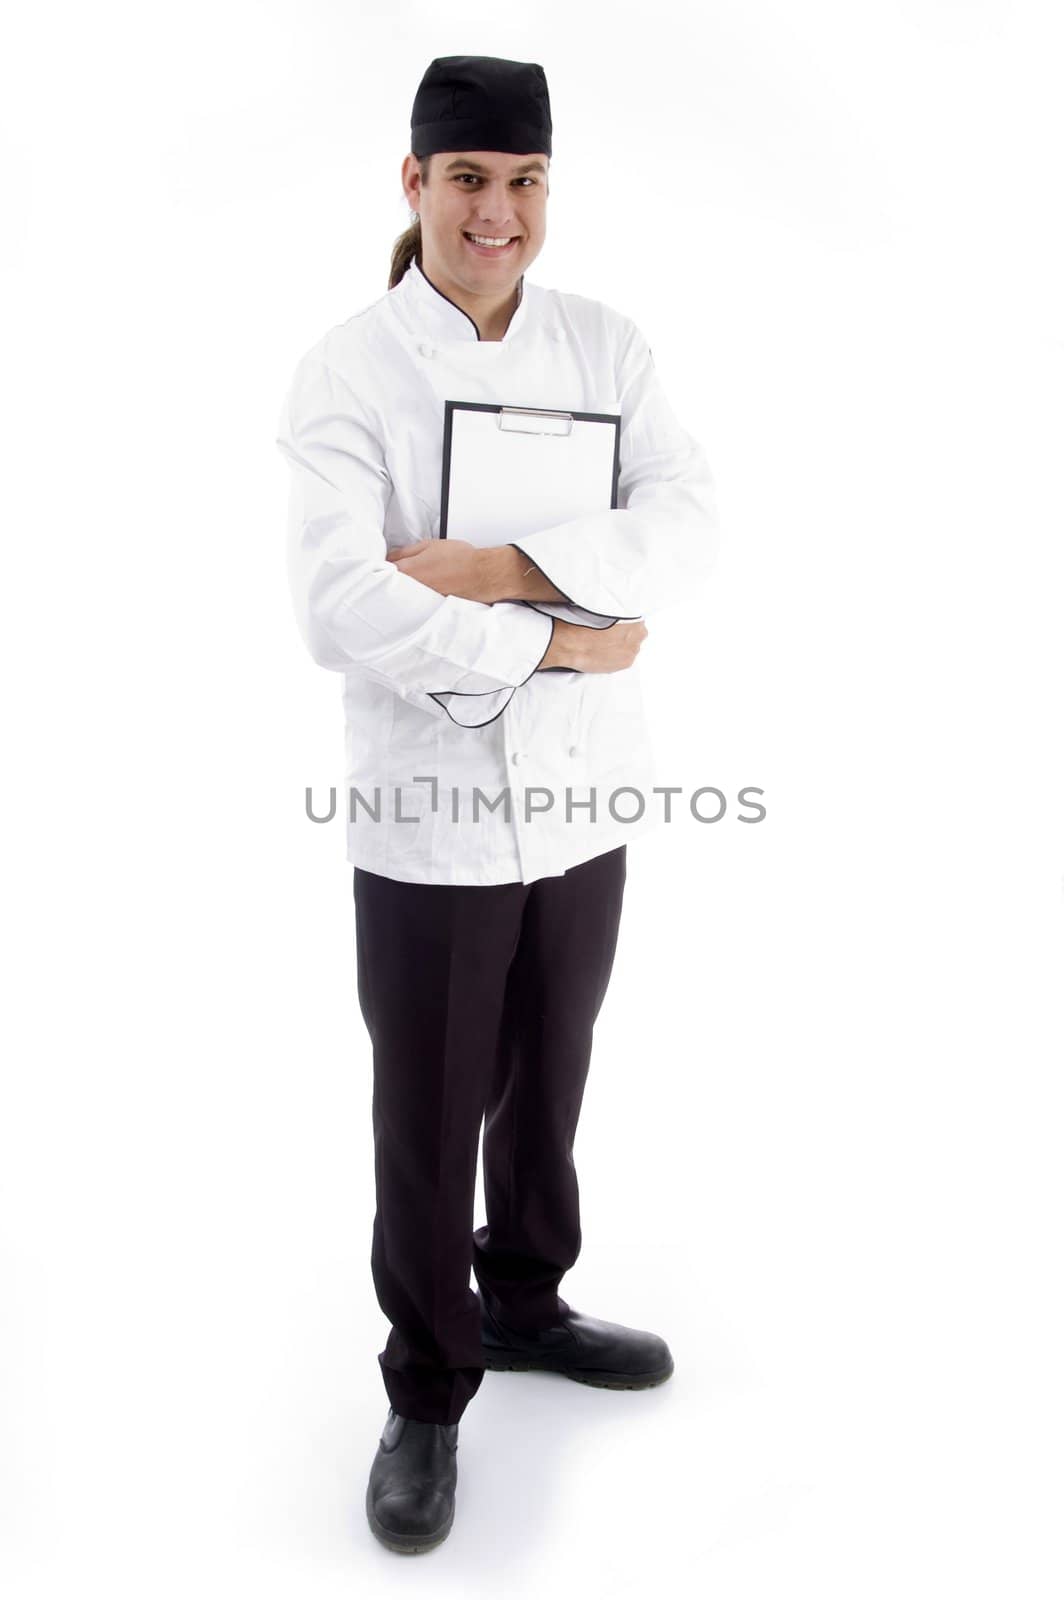 full body pose of handsome chef against white background